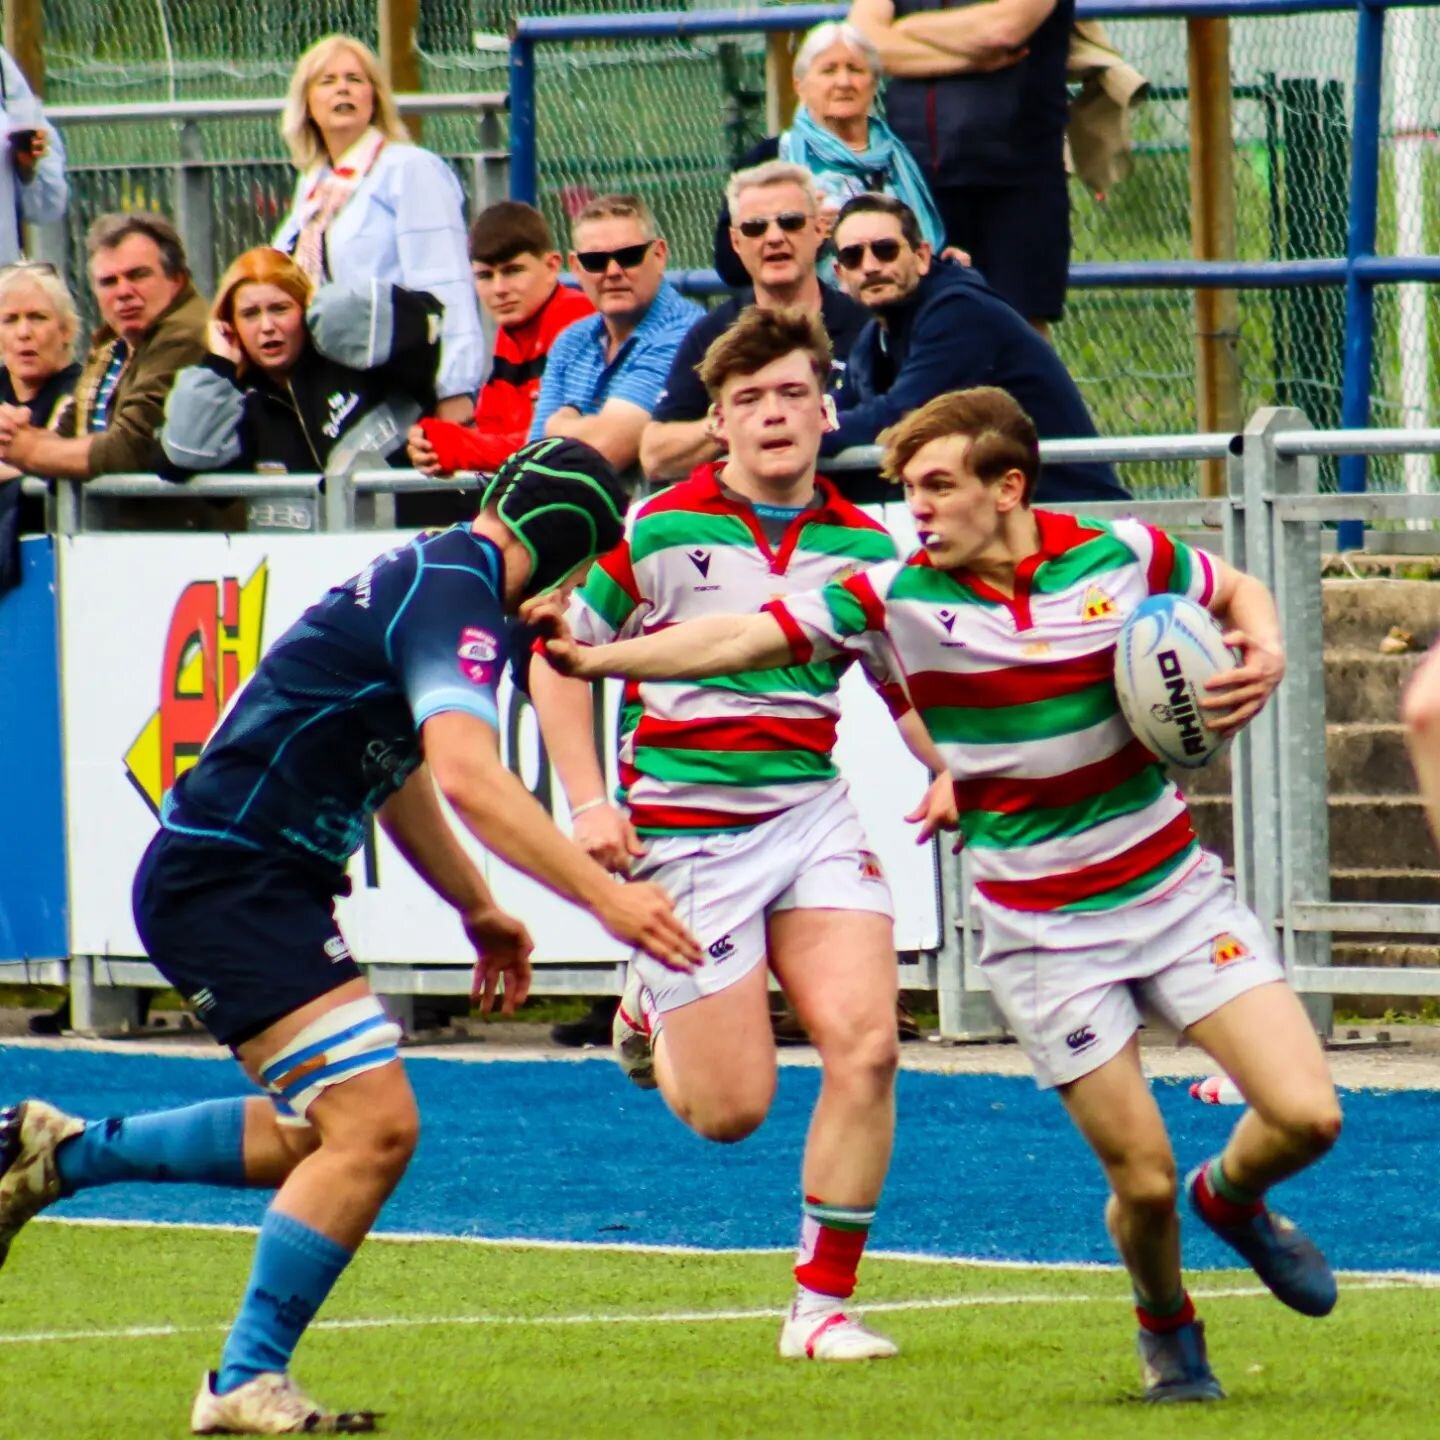 Match Photos from the Under 18's dramatic Cup Final win vs Barnhall last Sunday. 📸 

More photos are available on the Bective website or through the link in the Bective Story.